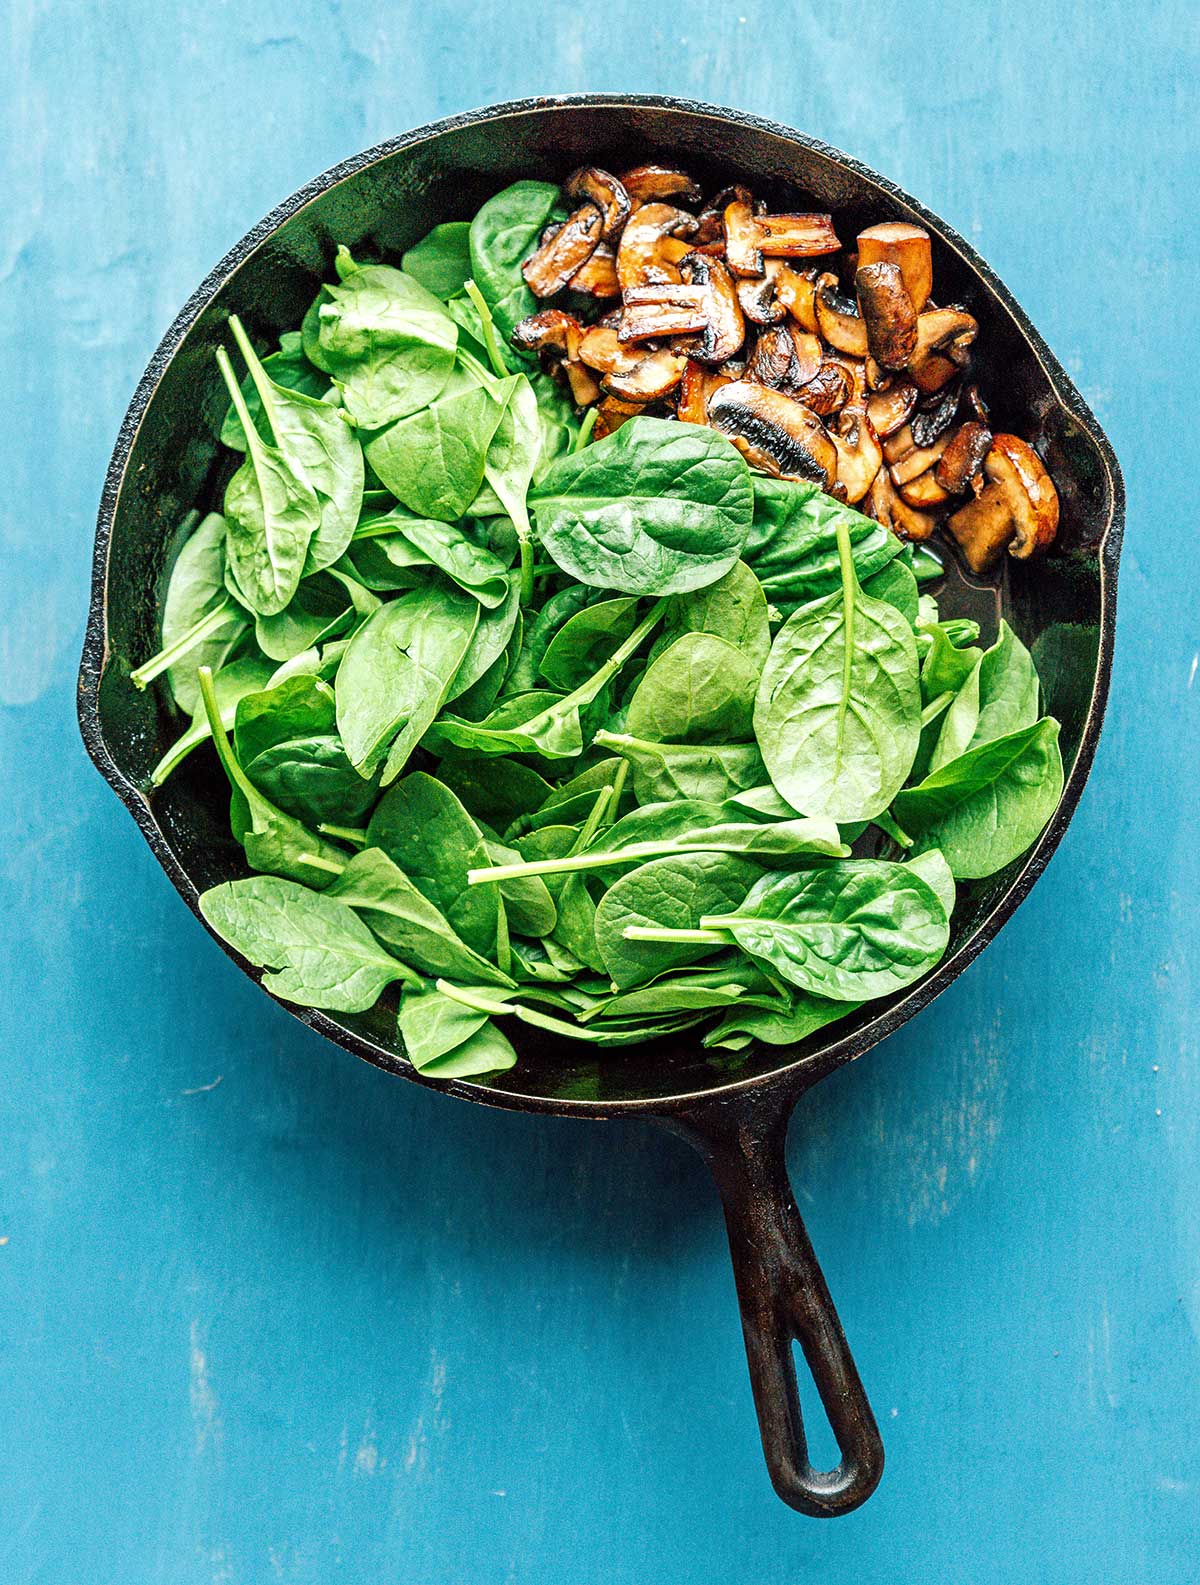 A saute pan filled with mushrooms and spinach